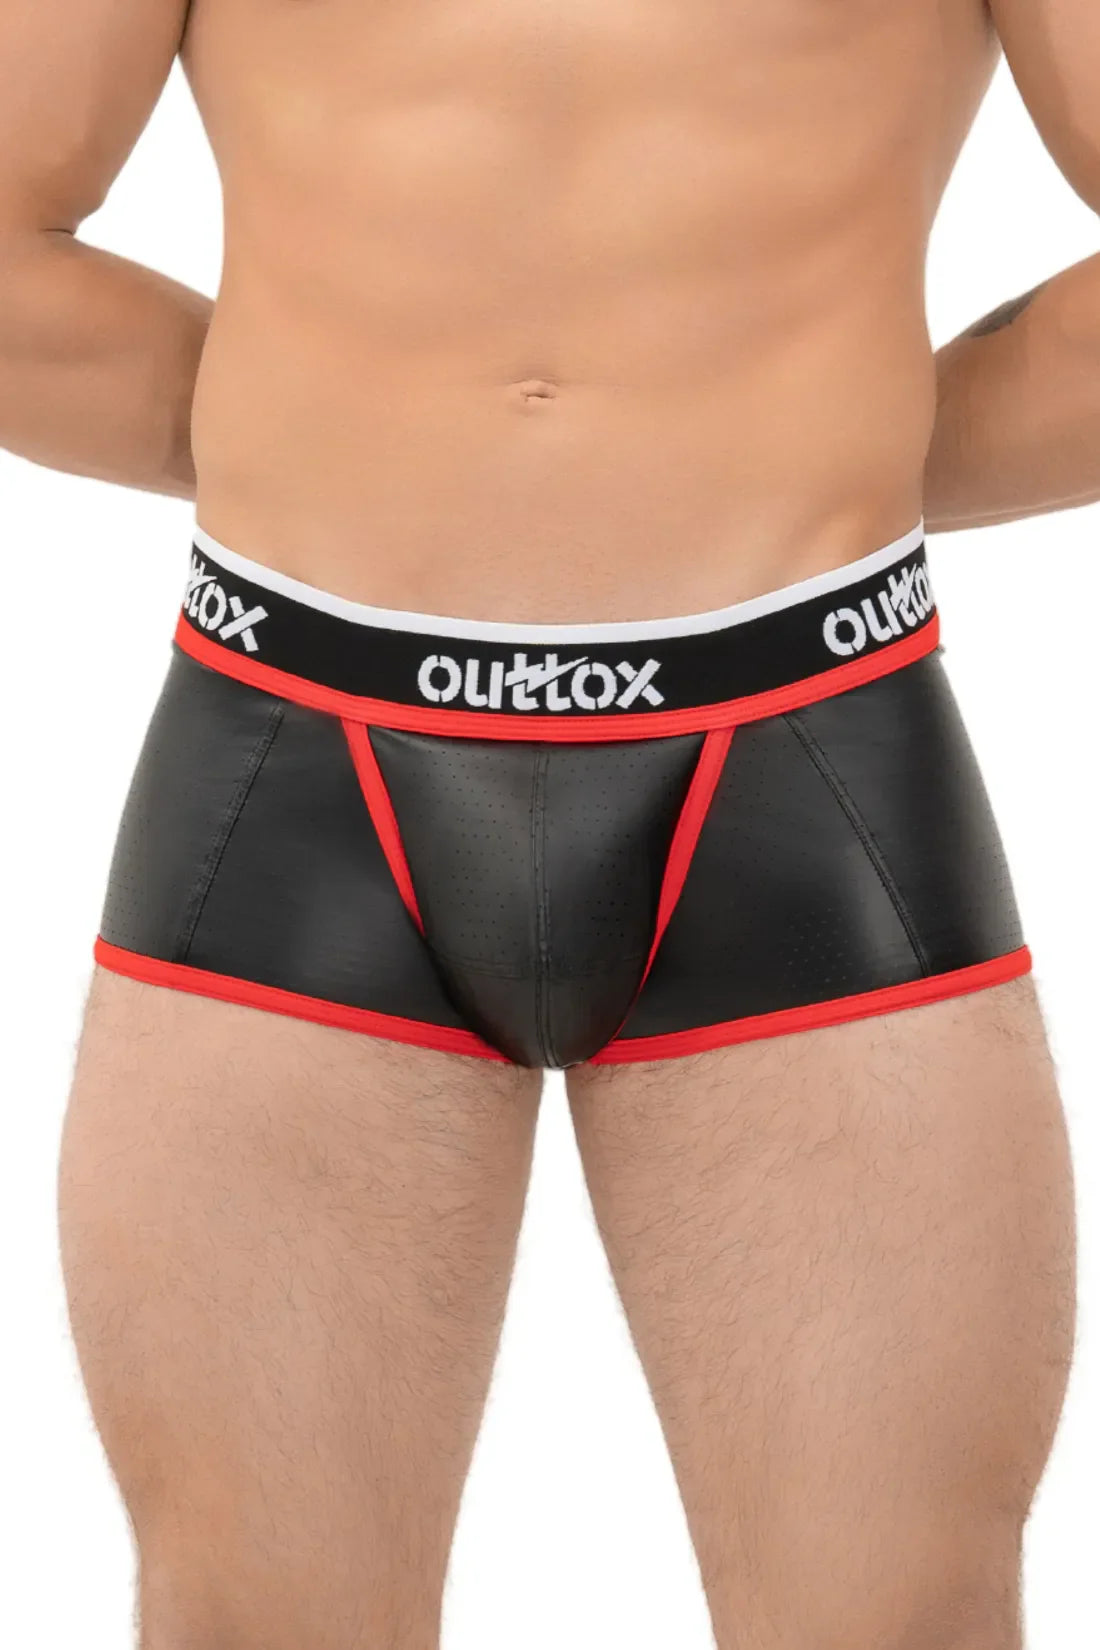 Outtox. Open Rear Trunk Shorts with Snap Codpiece. Black and Red